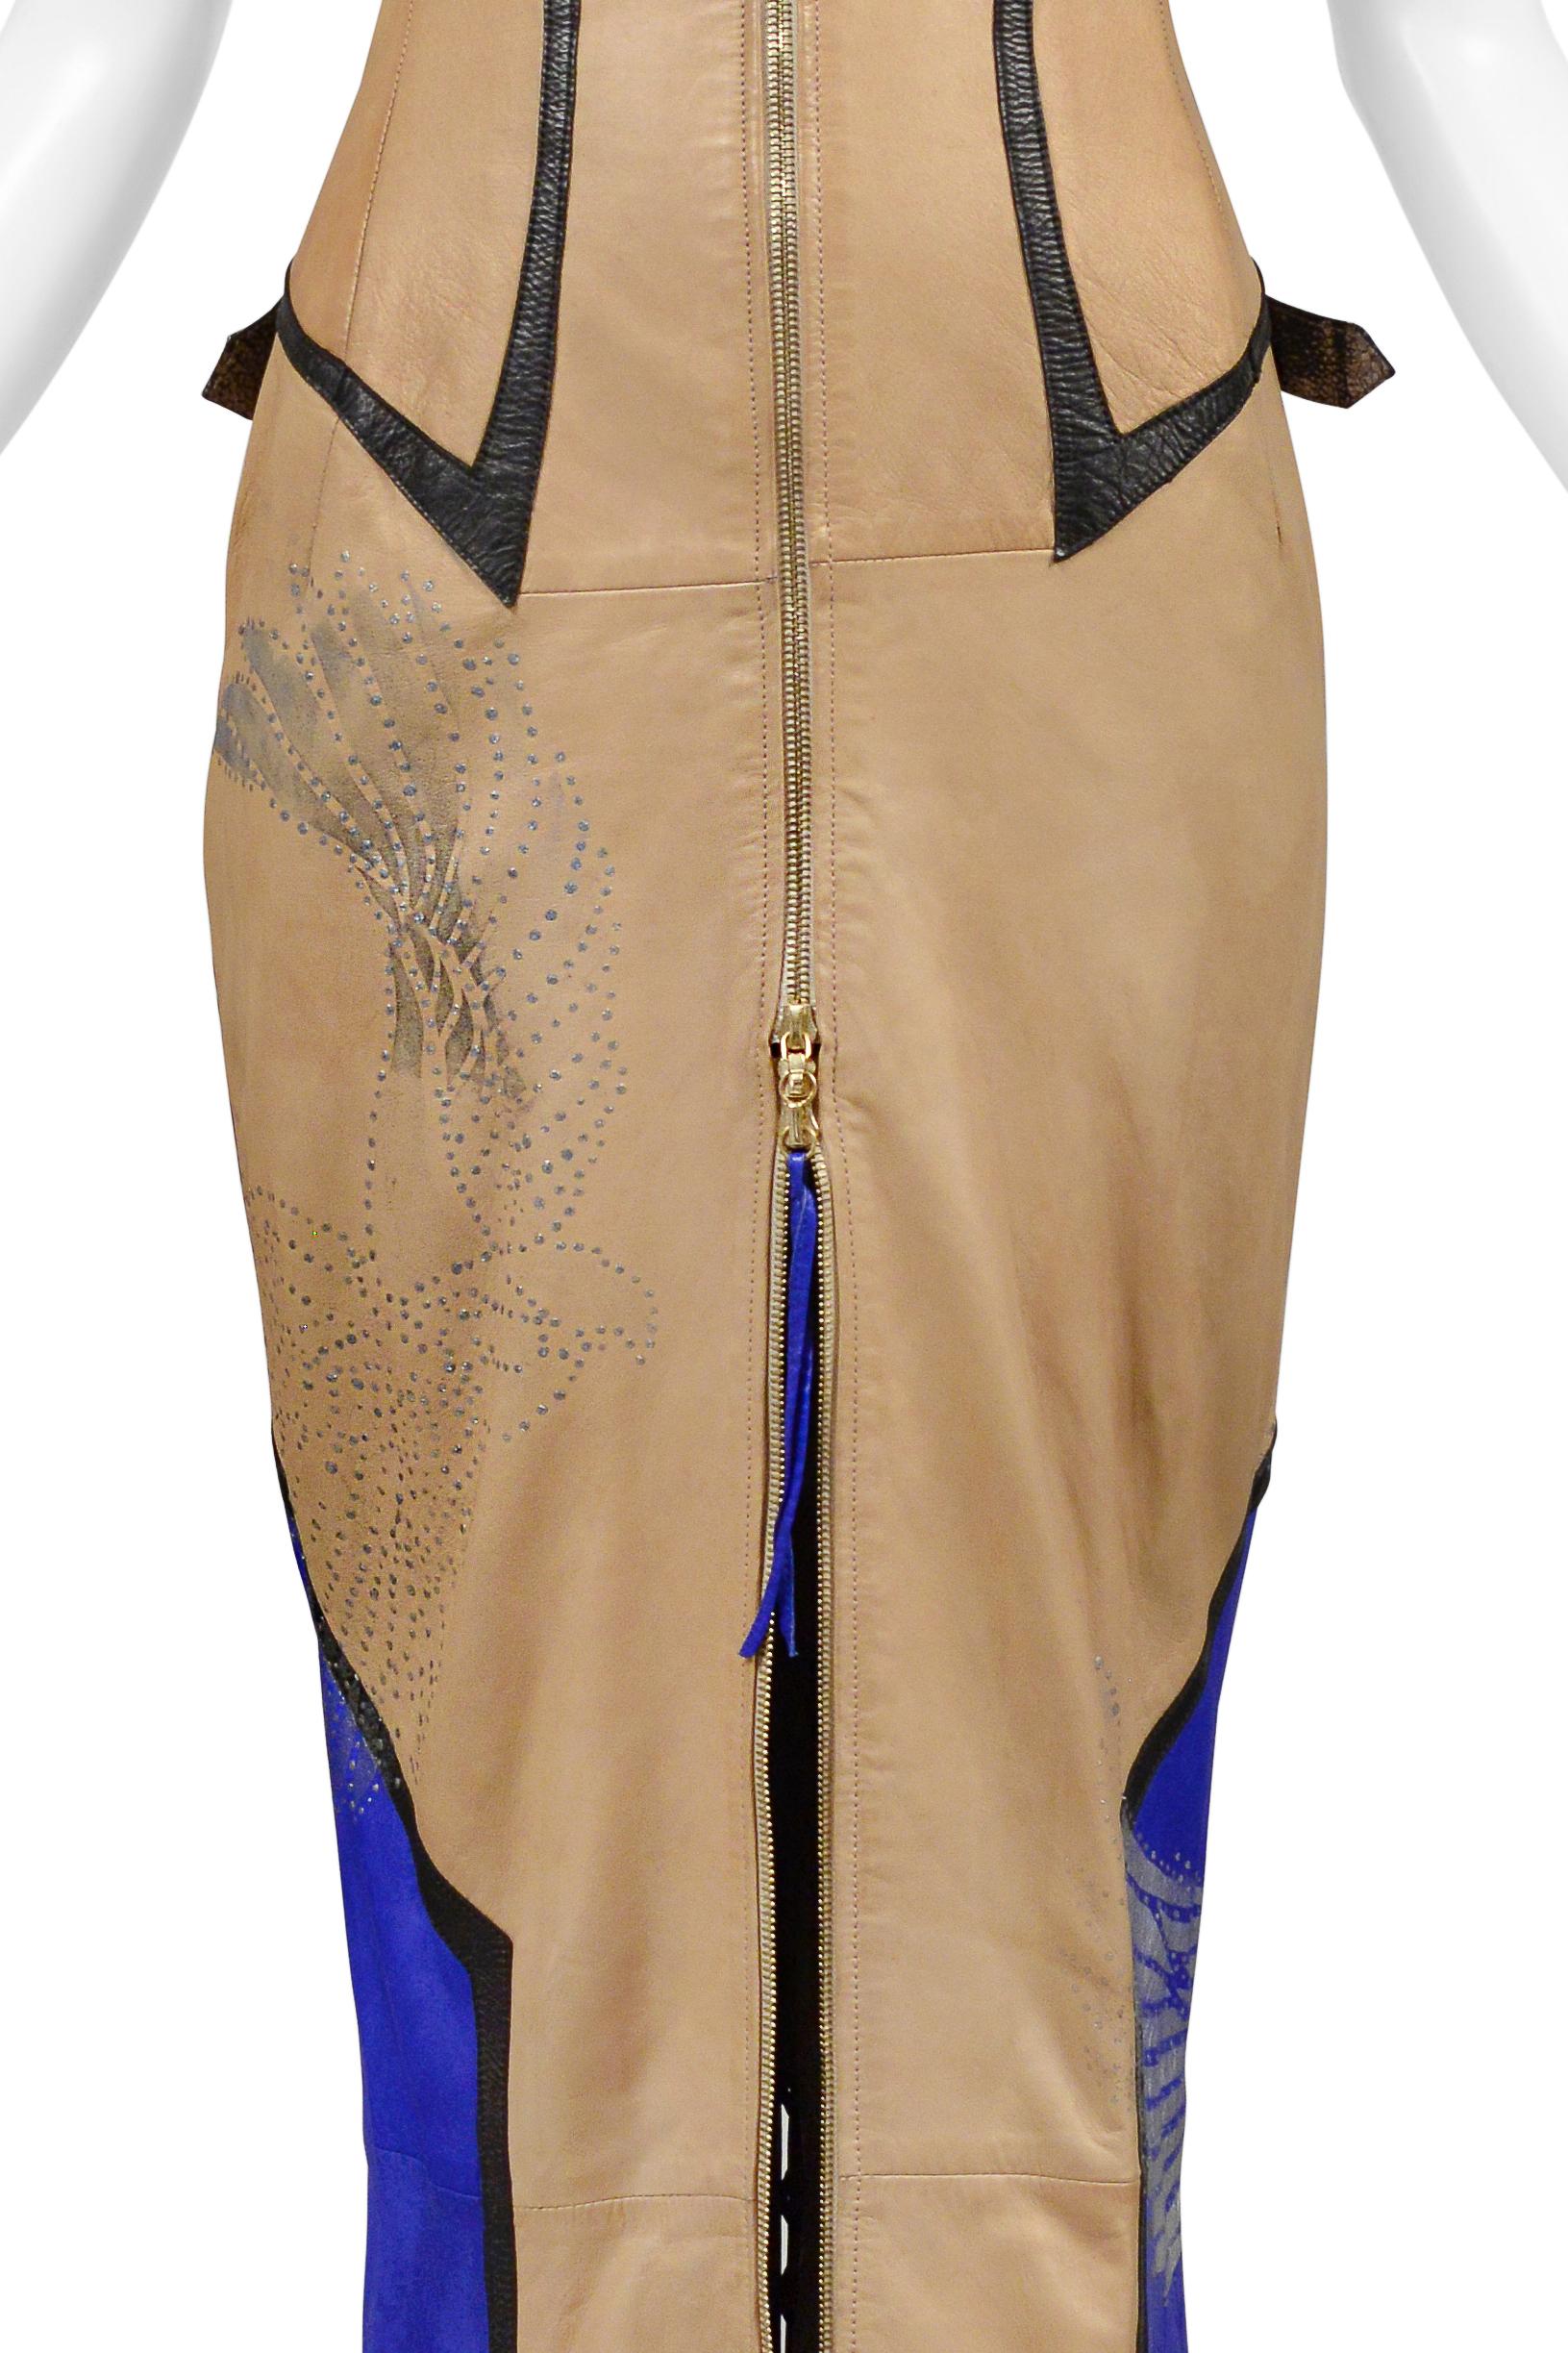 Roberto Cavalli  Leather Motorcycle Evening Gown 2003 In Good Condition For Sale In Los Angeles, CA